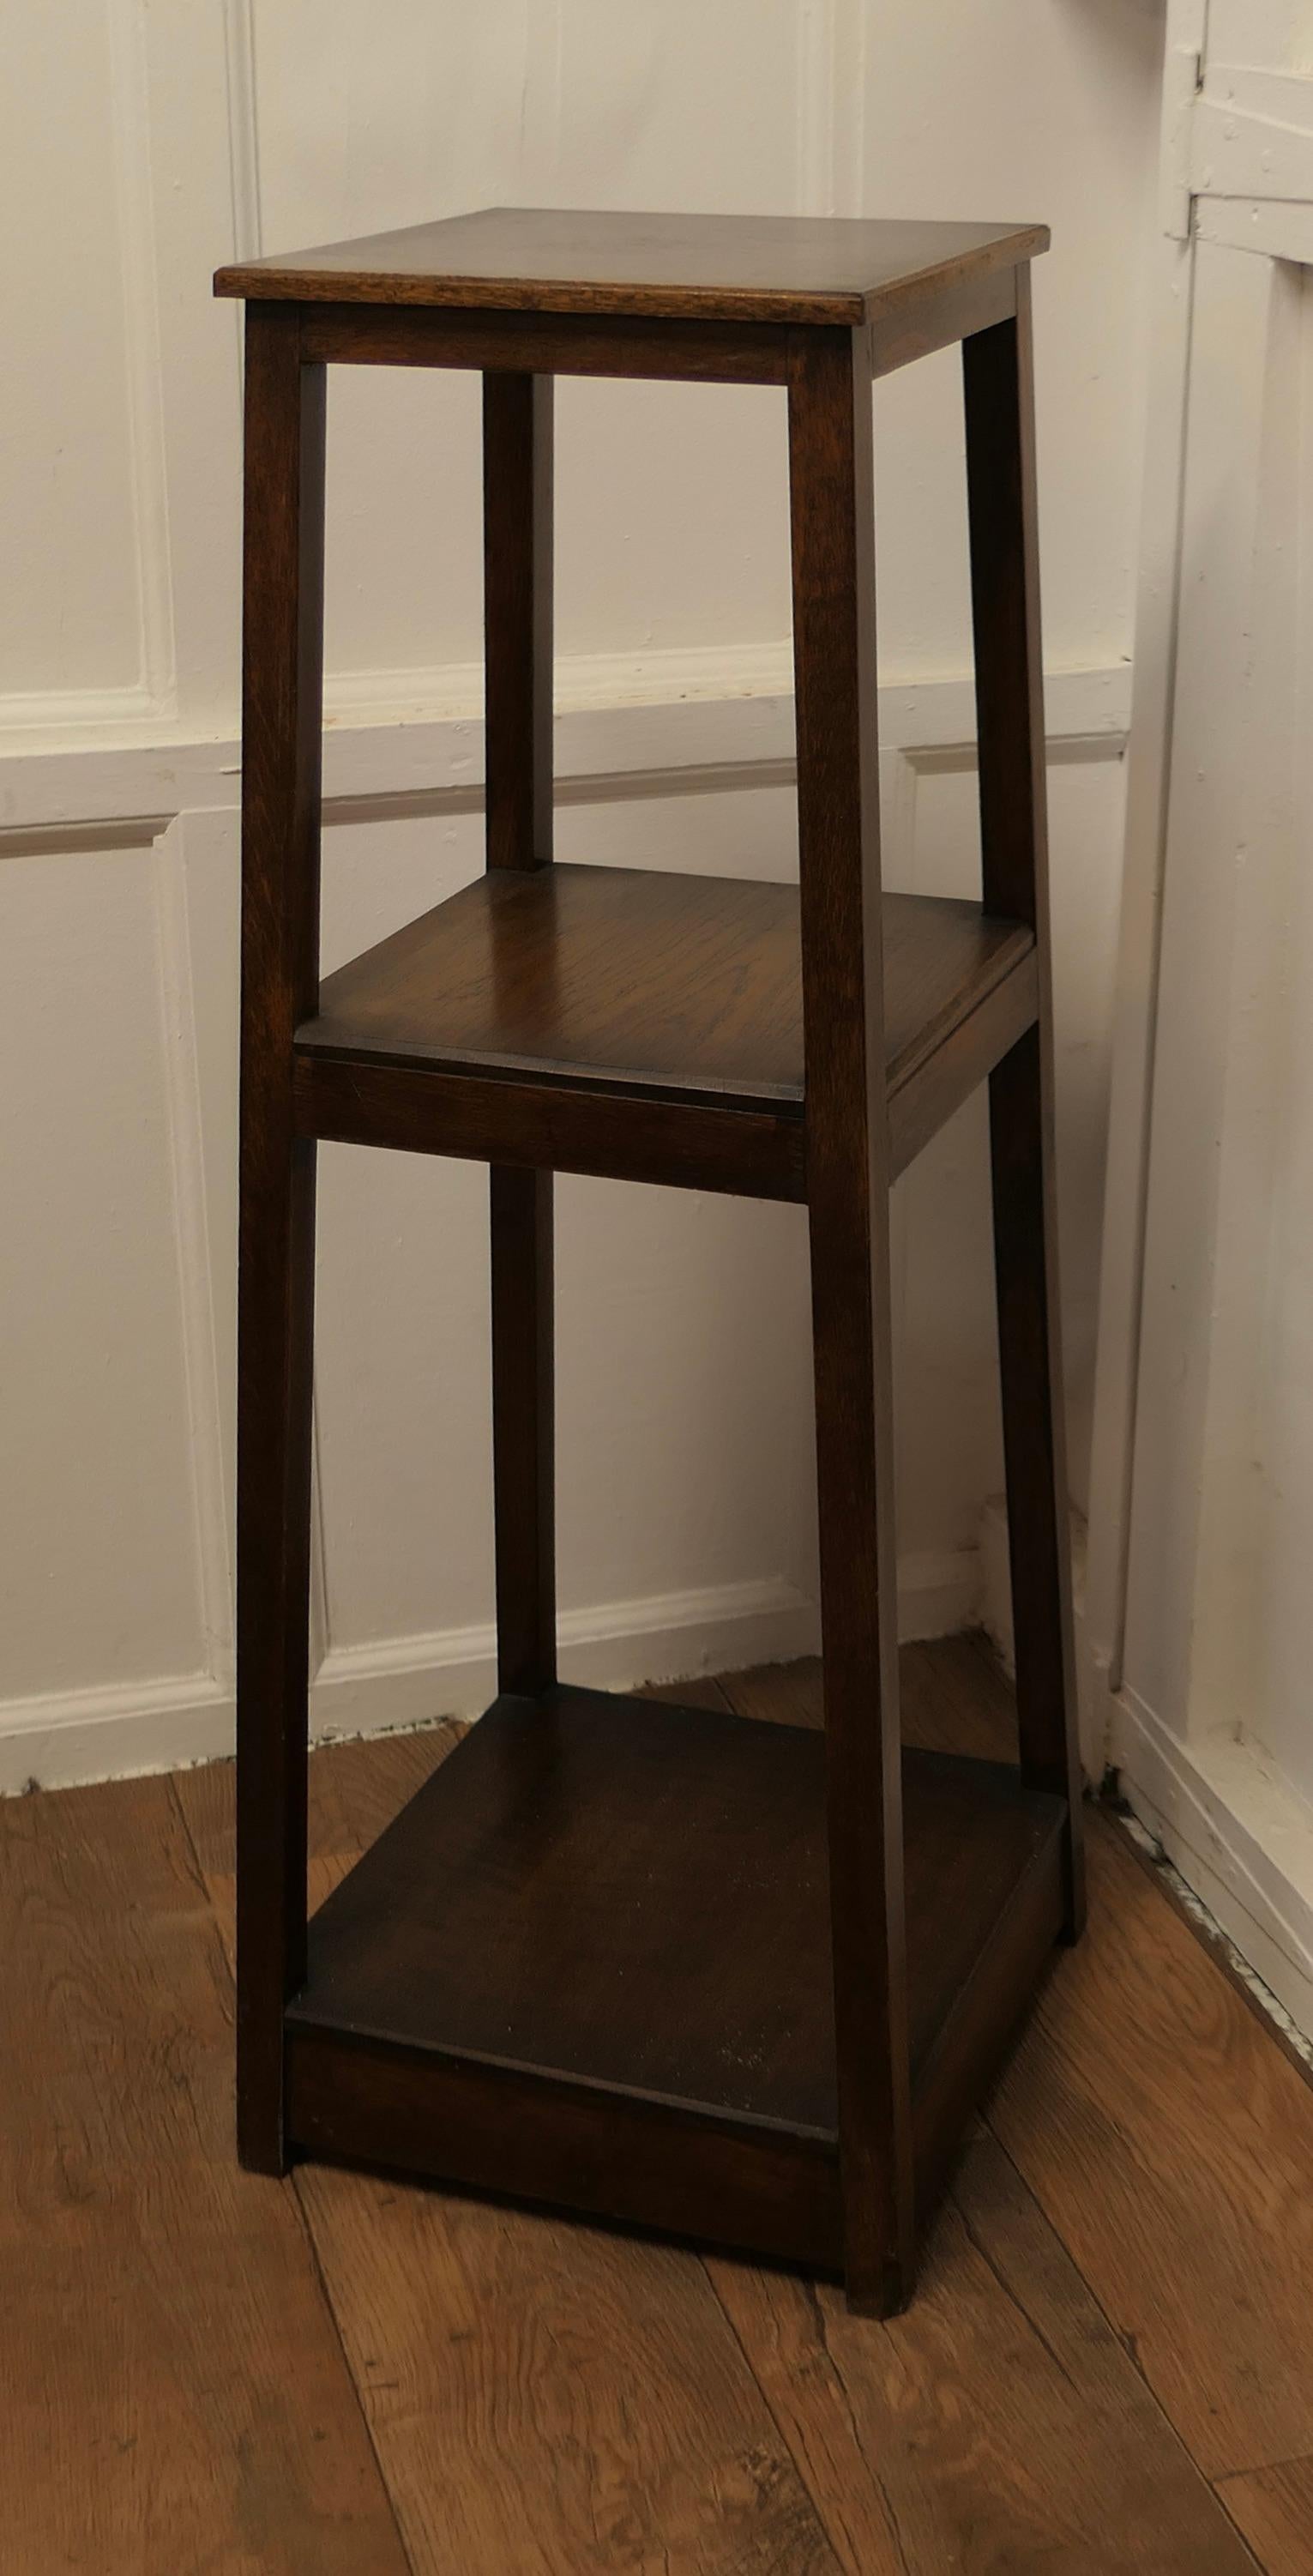 Oak Etagere or Plant Stand

This is a very useful piece, it is rectangular and  wider at the floor, it has 3 tiers and good clean lines
The etagere is 42” high, and 16” square at the floor
TSW173